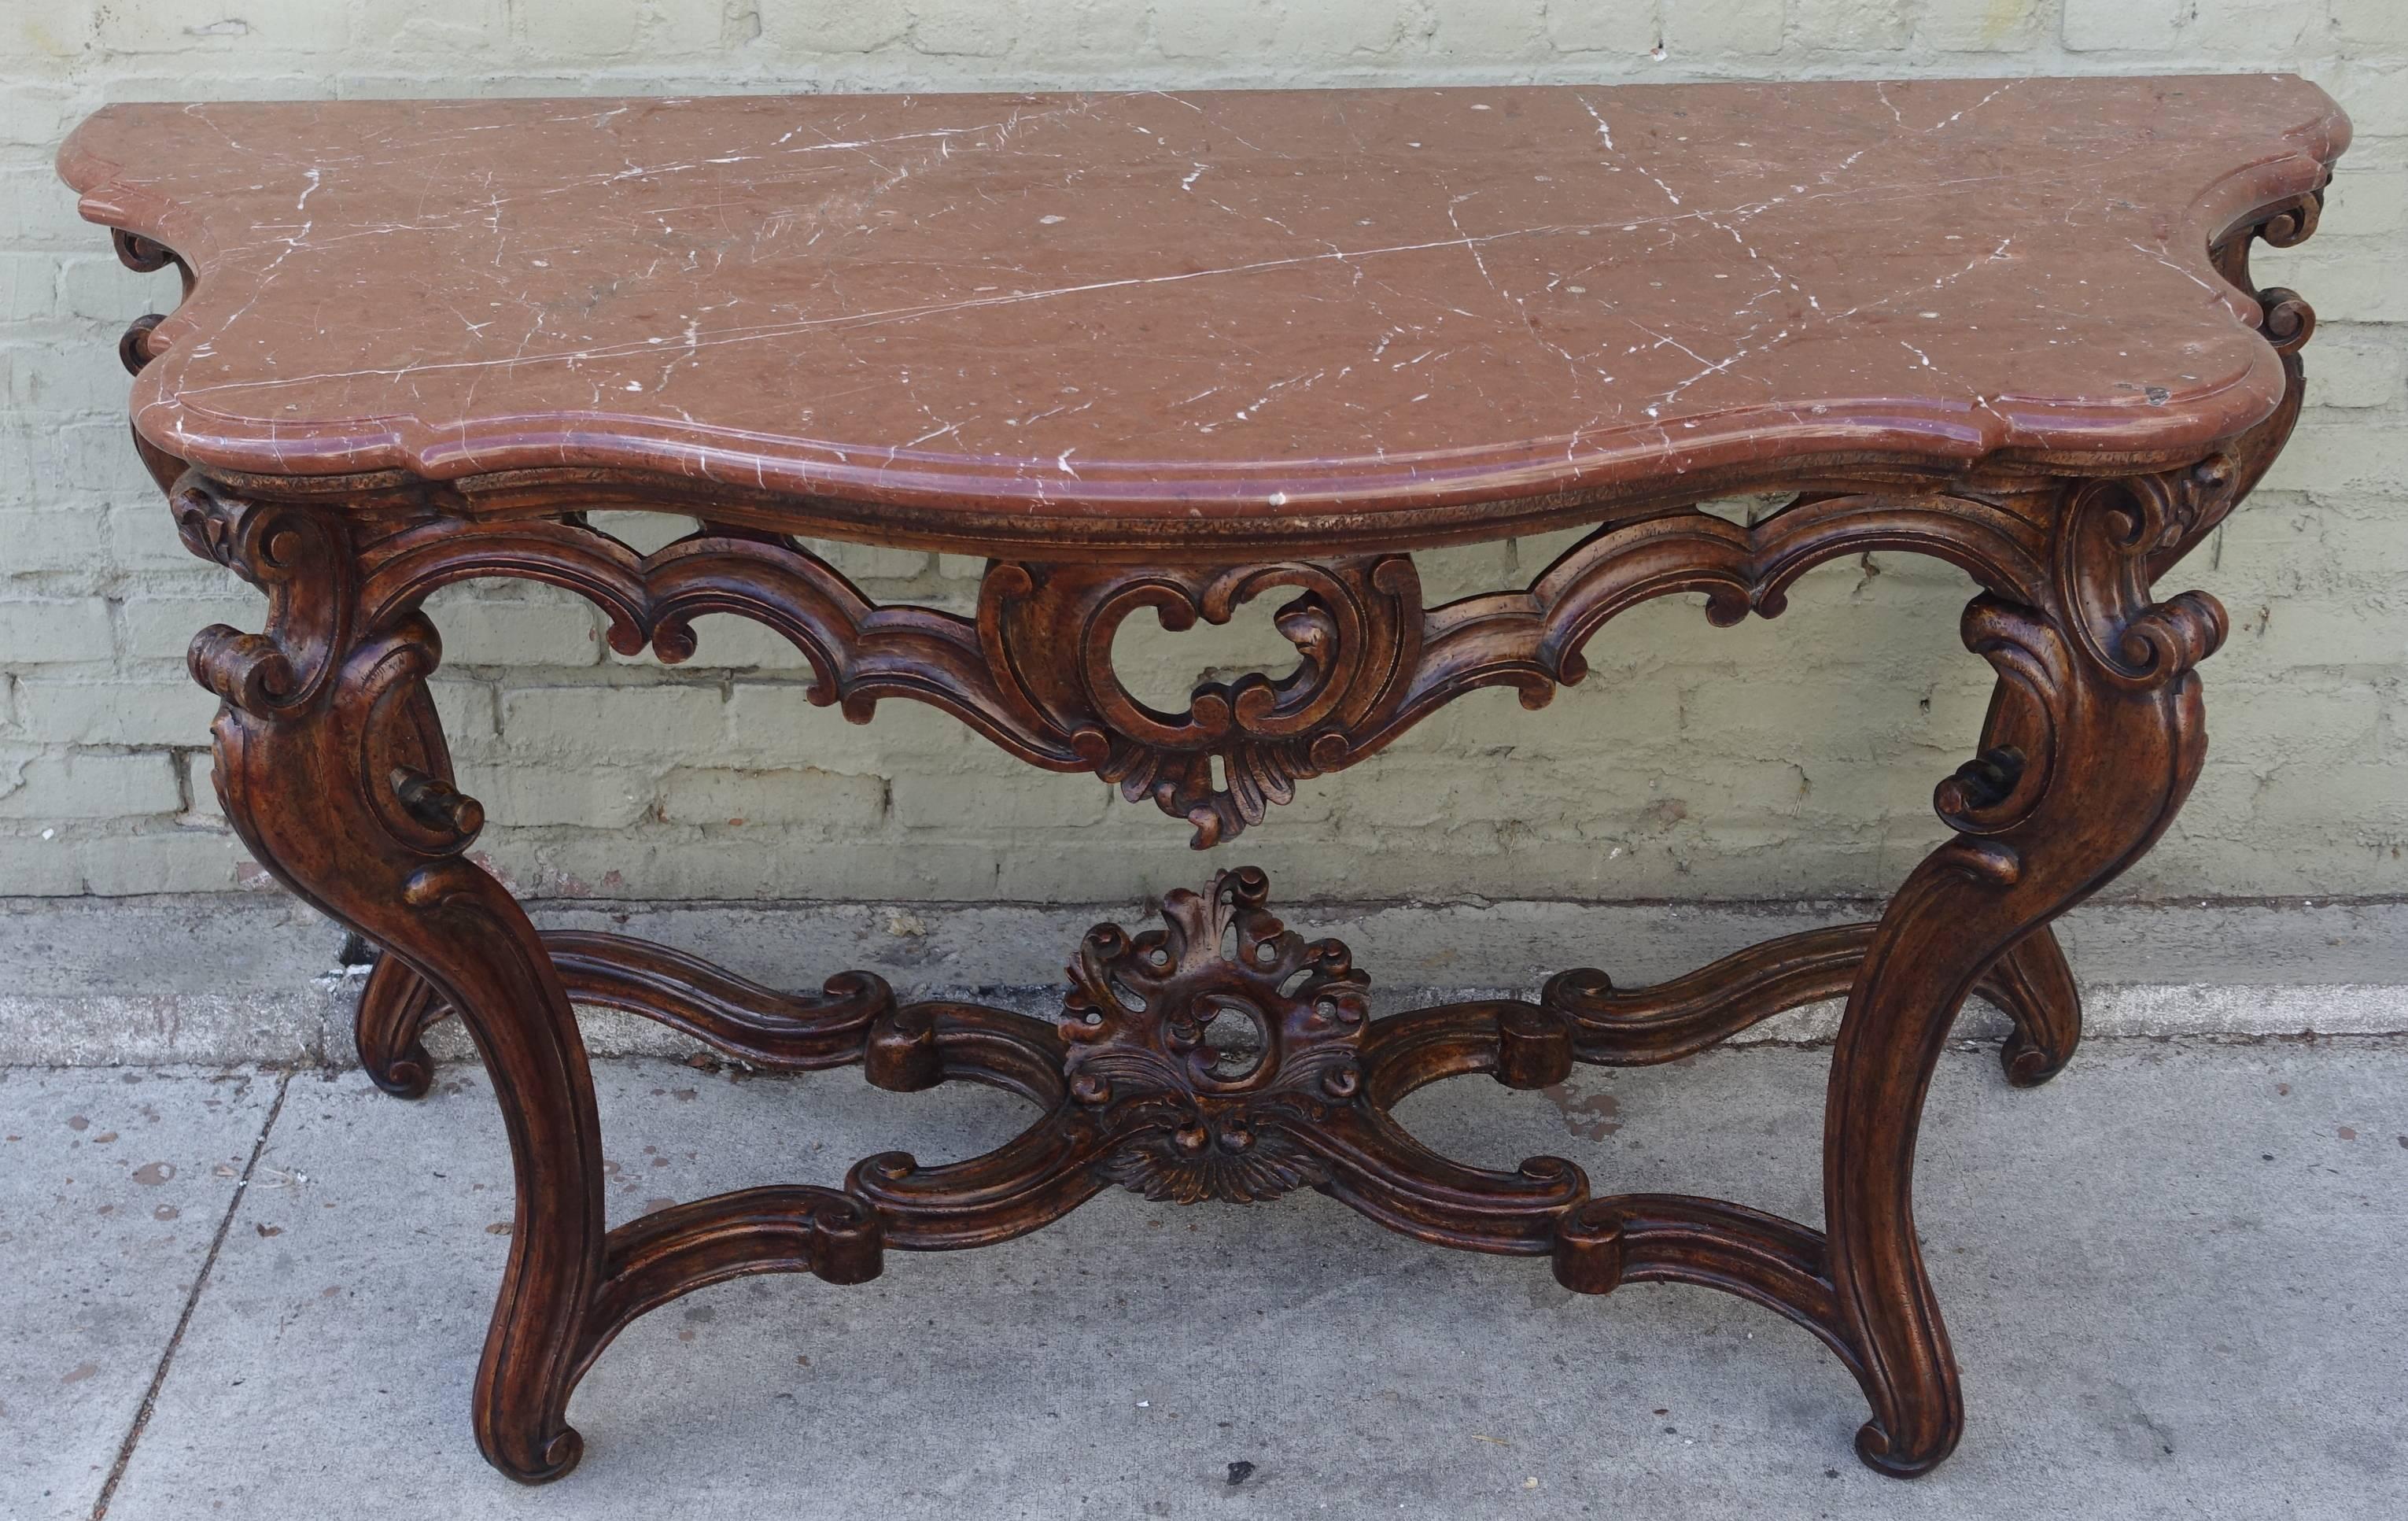 Pair of 19th century French serpentine carved walnut consoles with original marble tops.